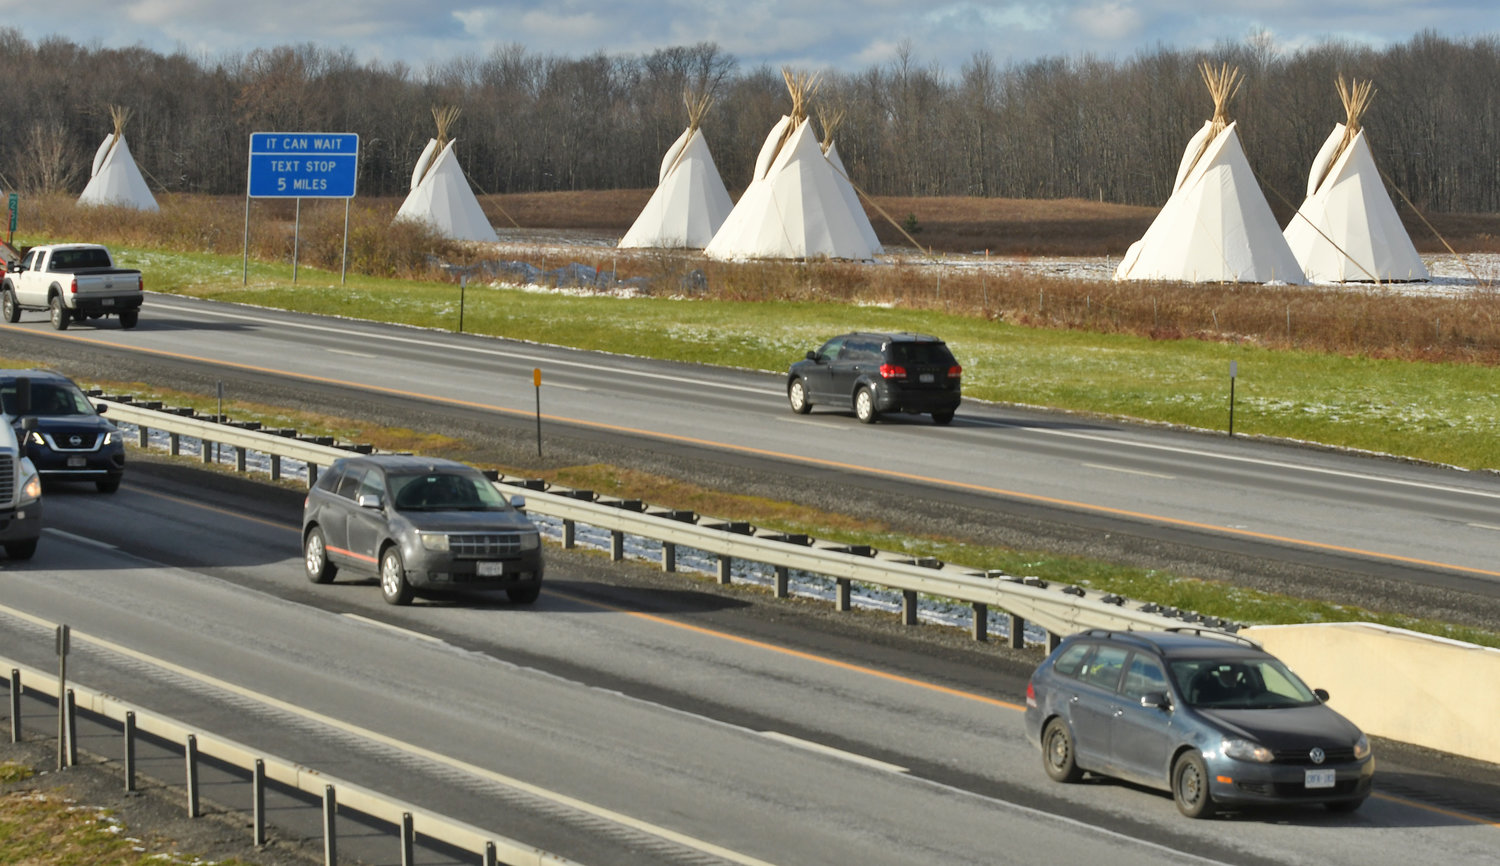 PEACE PASSAGE - Comprised of seven illuminated tipis located on the land of the Oneida Indian Nation just before Exit 33 of I-90, the Peace Passage will take place during the holidays.  The Oneida Indian Nation chose the tipi as the central image of the Peace Passage to recognize both these Western tribal nations and the collective challenges of Native American peoples.  While the Oneidas and other Iroquois tribes lived in longhouses, not tipis, the tipi is a universally recognized symbol of Native American identity.  Busy east and westbound traffic on the NY State Thruway with giant teepees on the north side of the crossing before the Verona exit westbound.